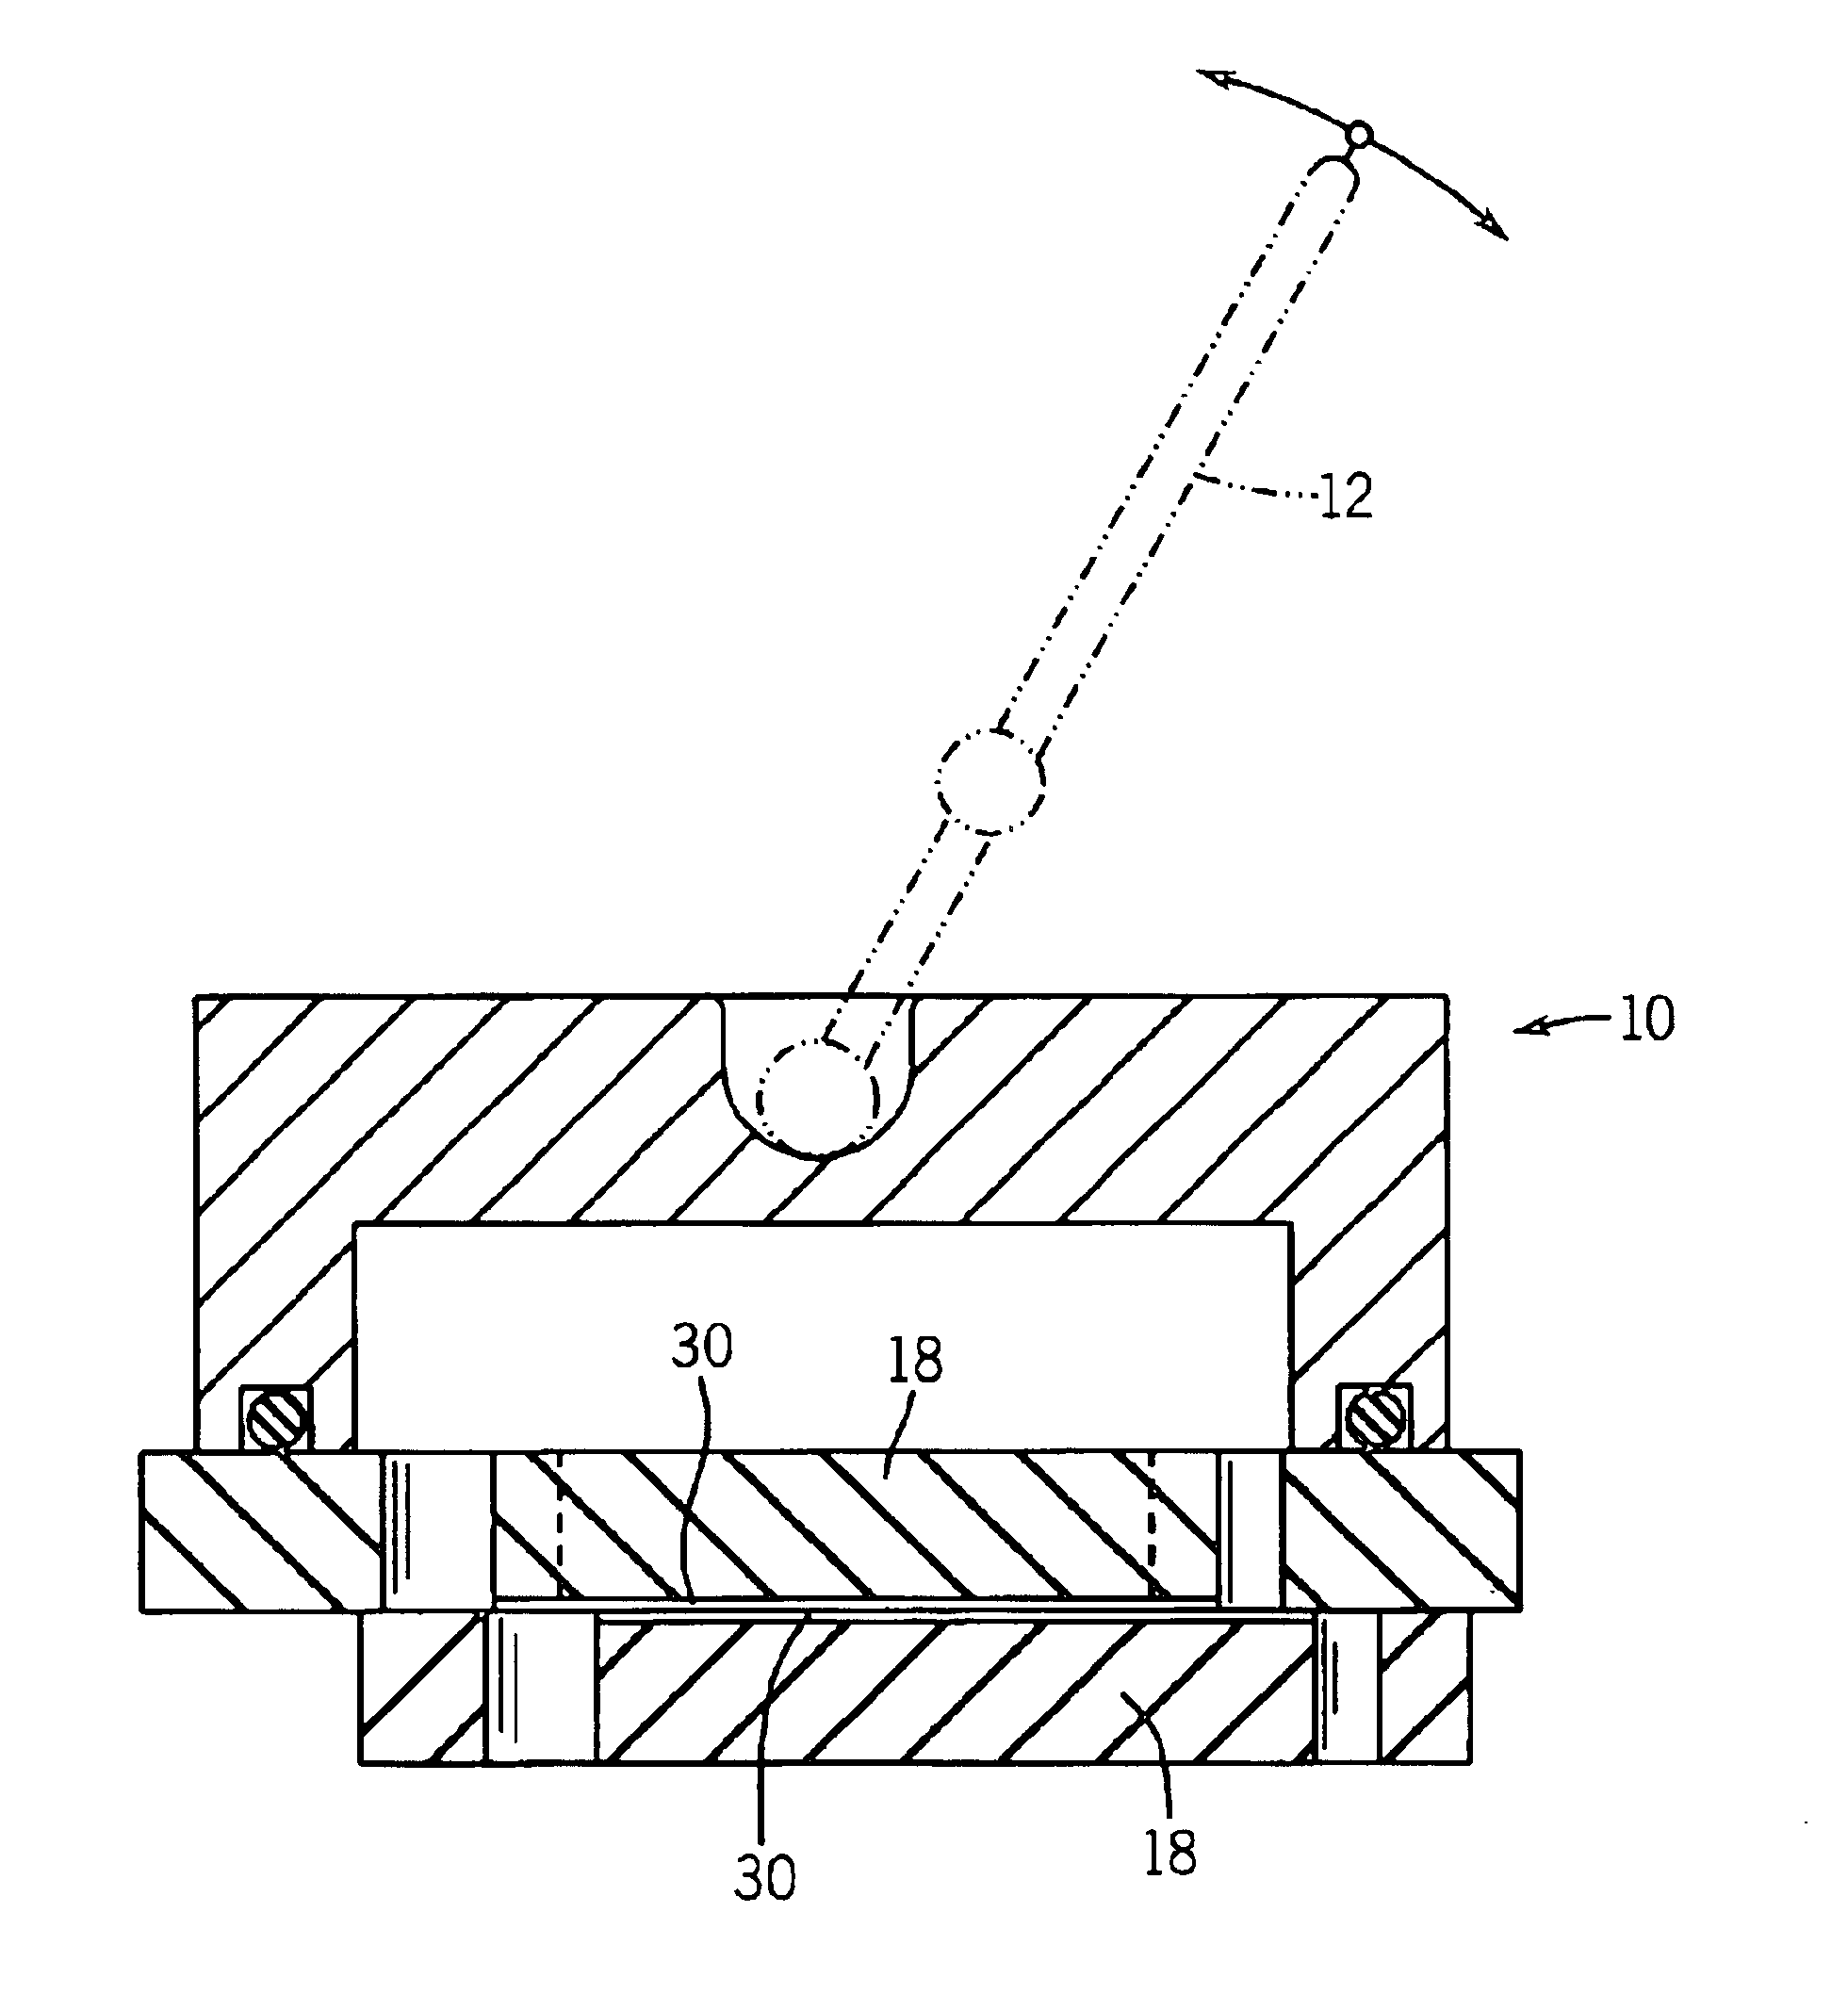 Valve component with multiple surface layers